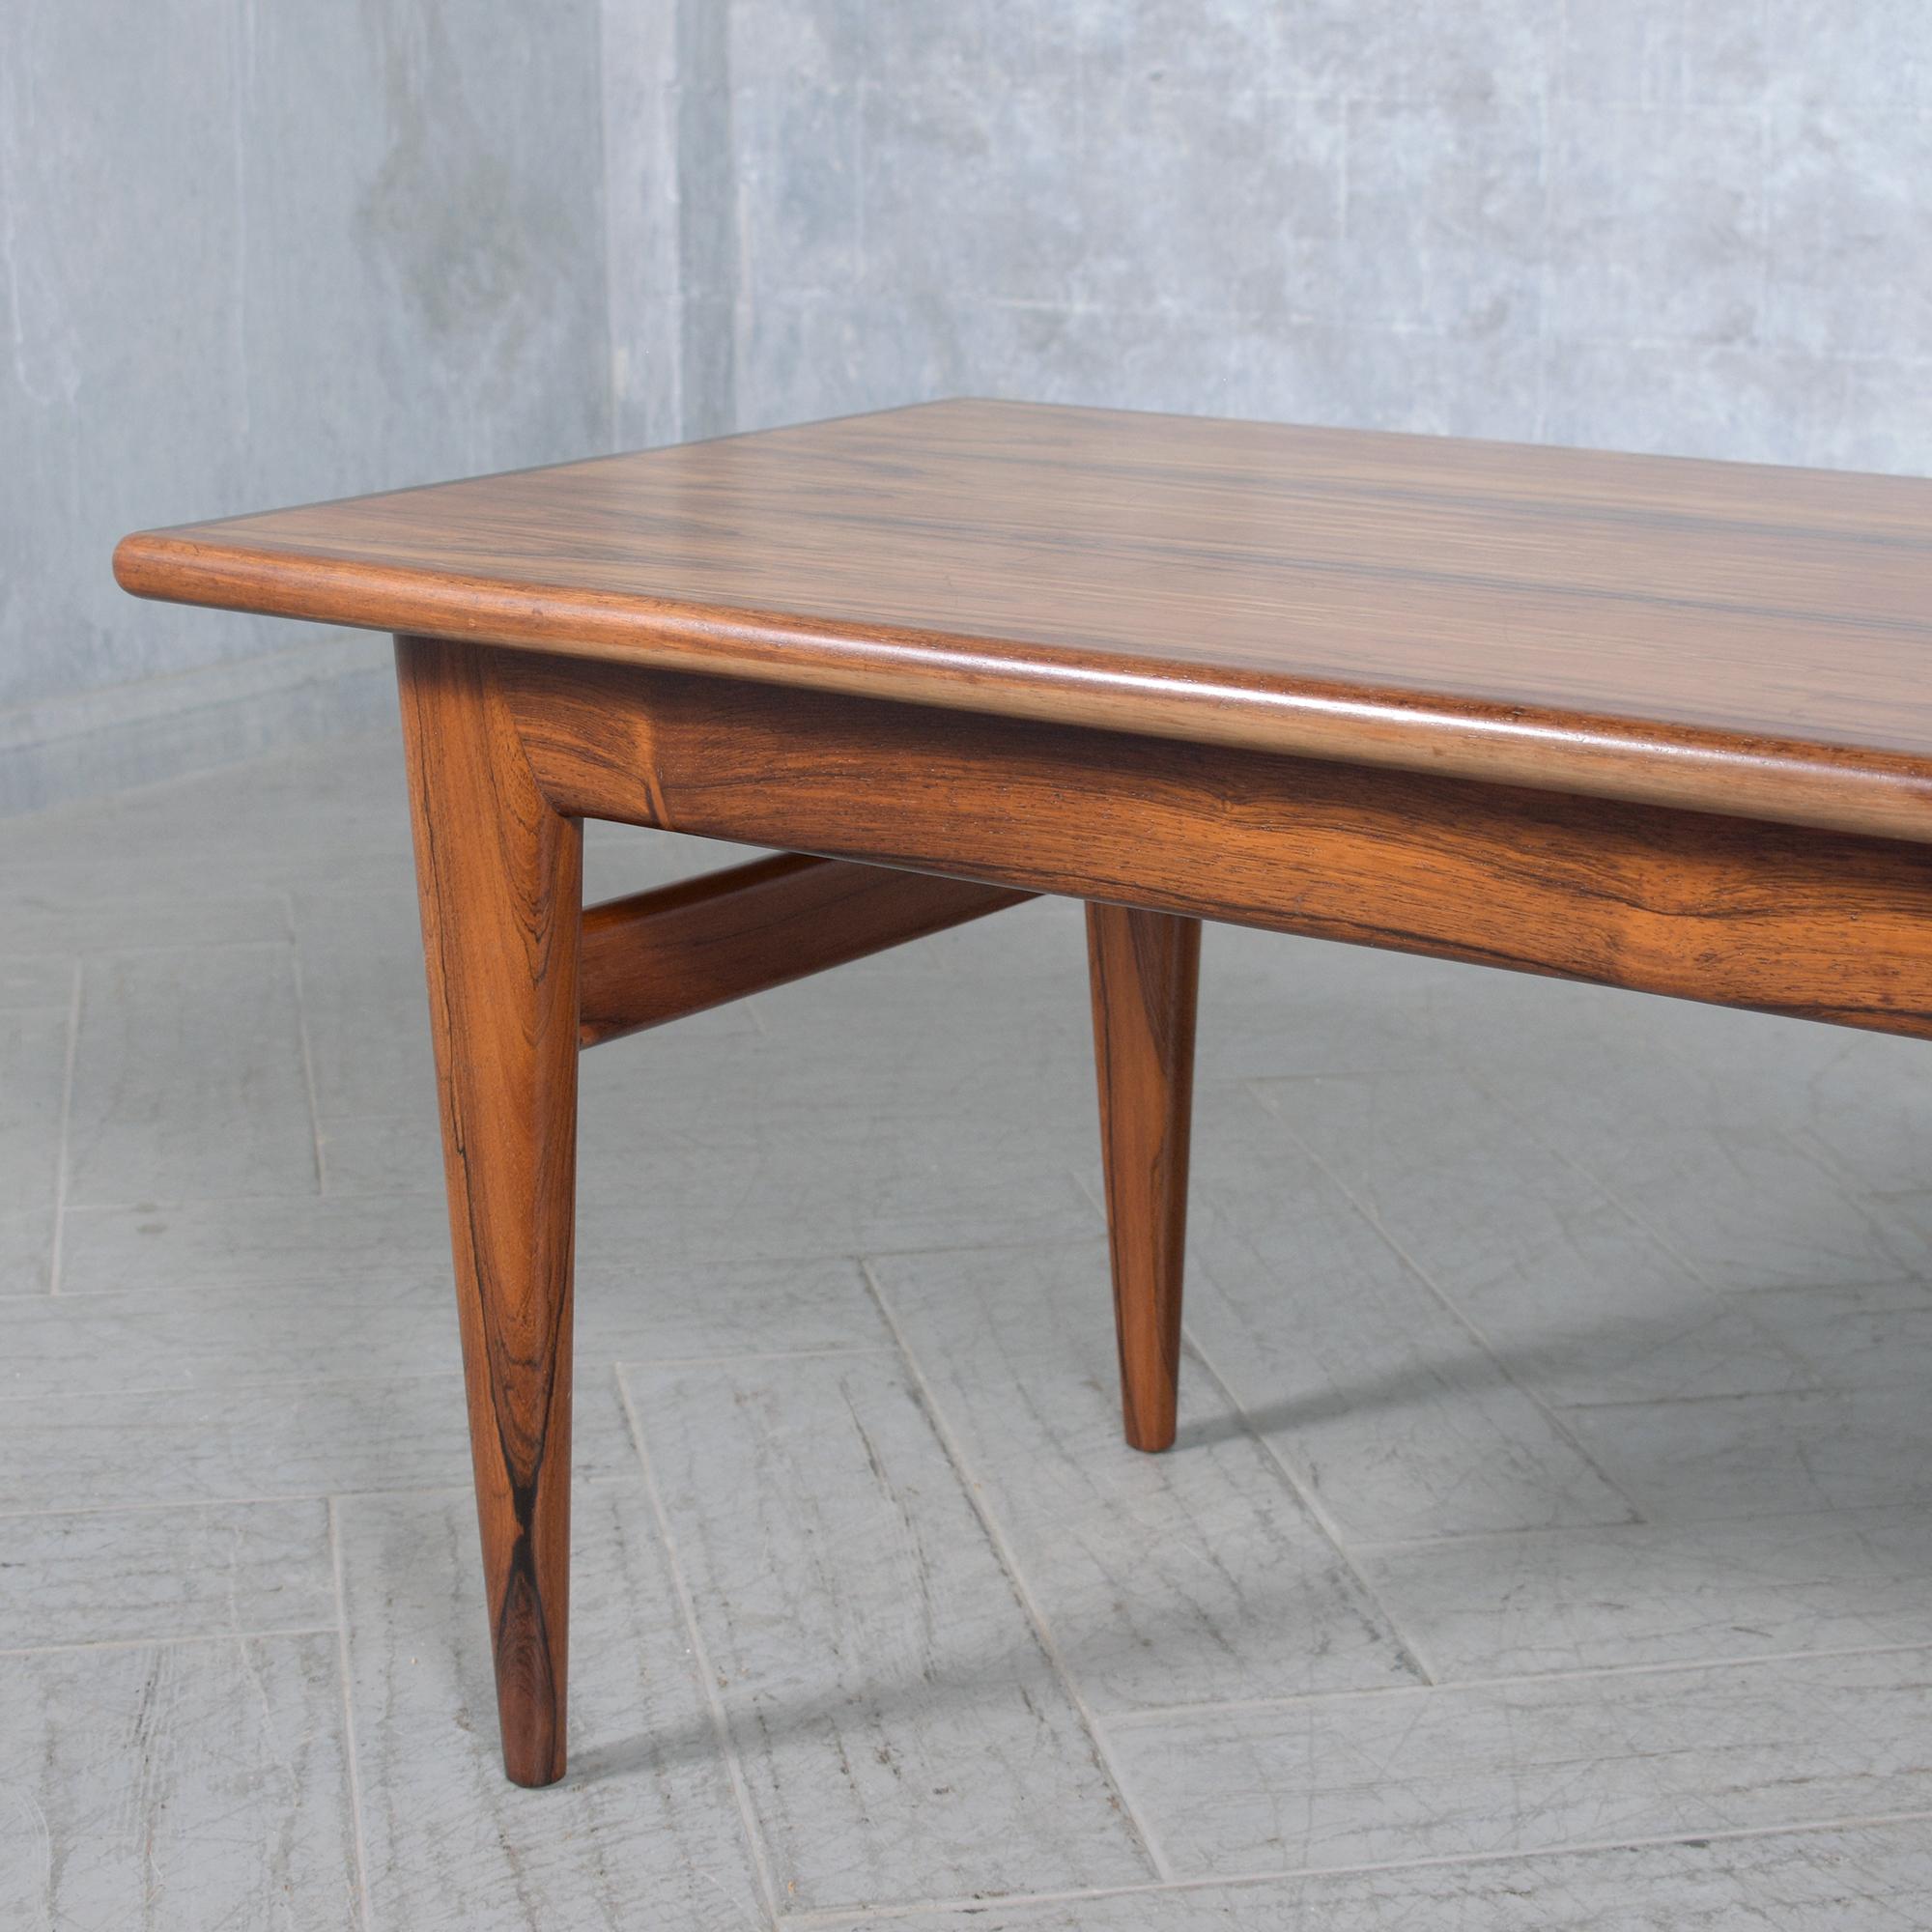 Modern Scandinavian Rosewood Coffee Table: Mid-Century Elegance In Good Condition For Sale In Los Angeles, CA